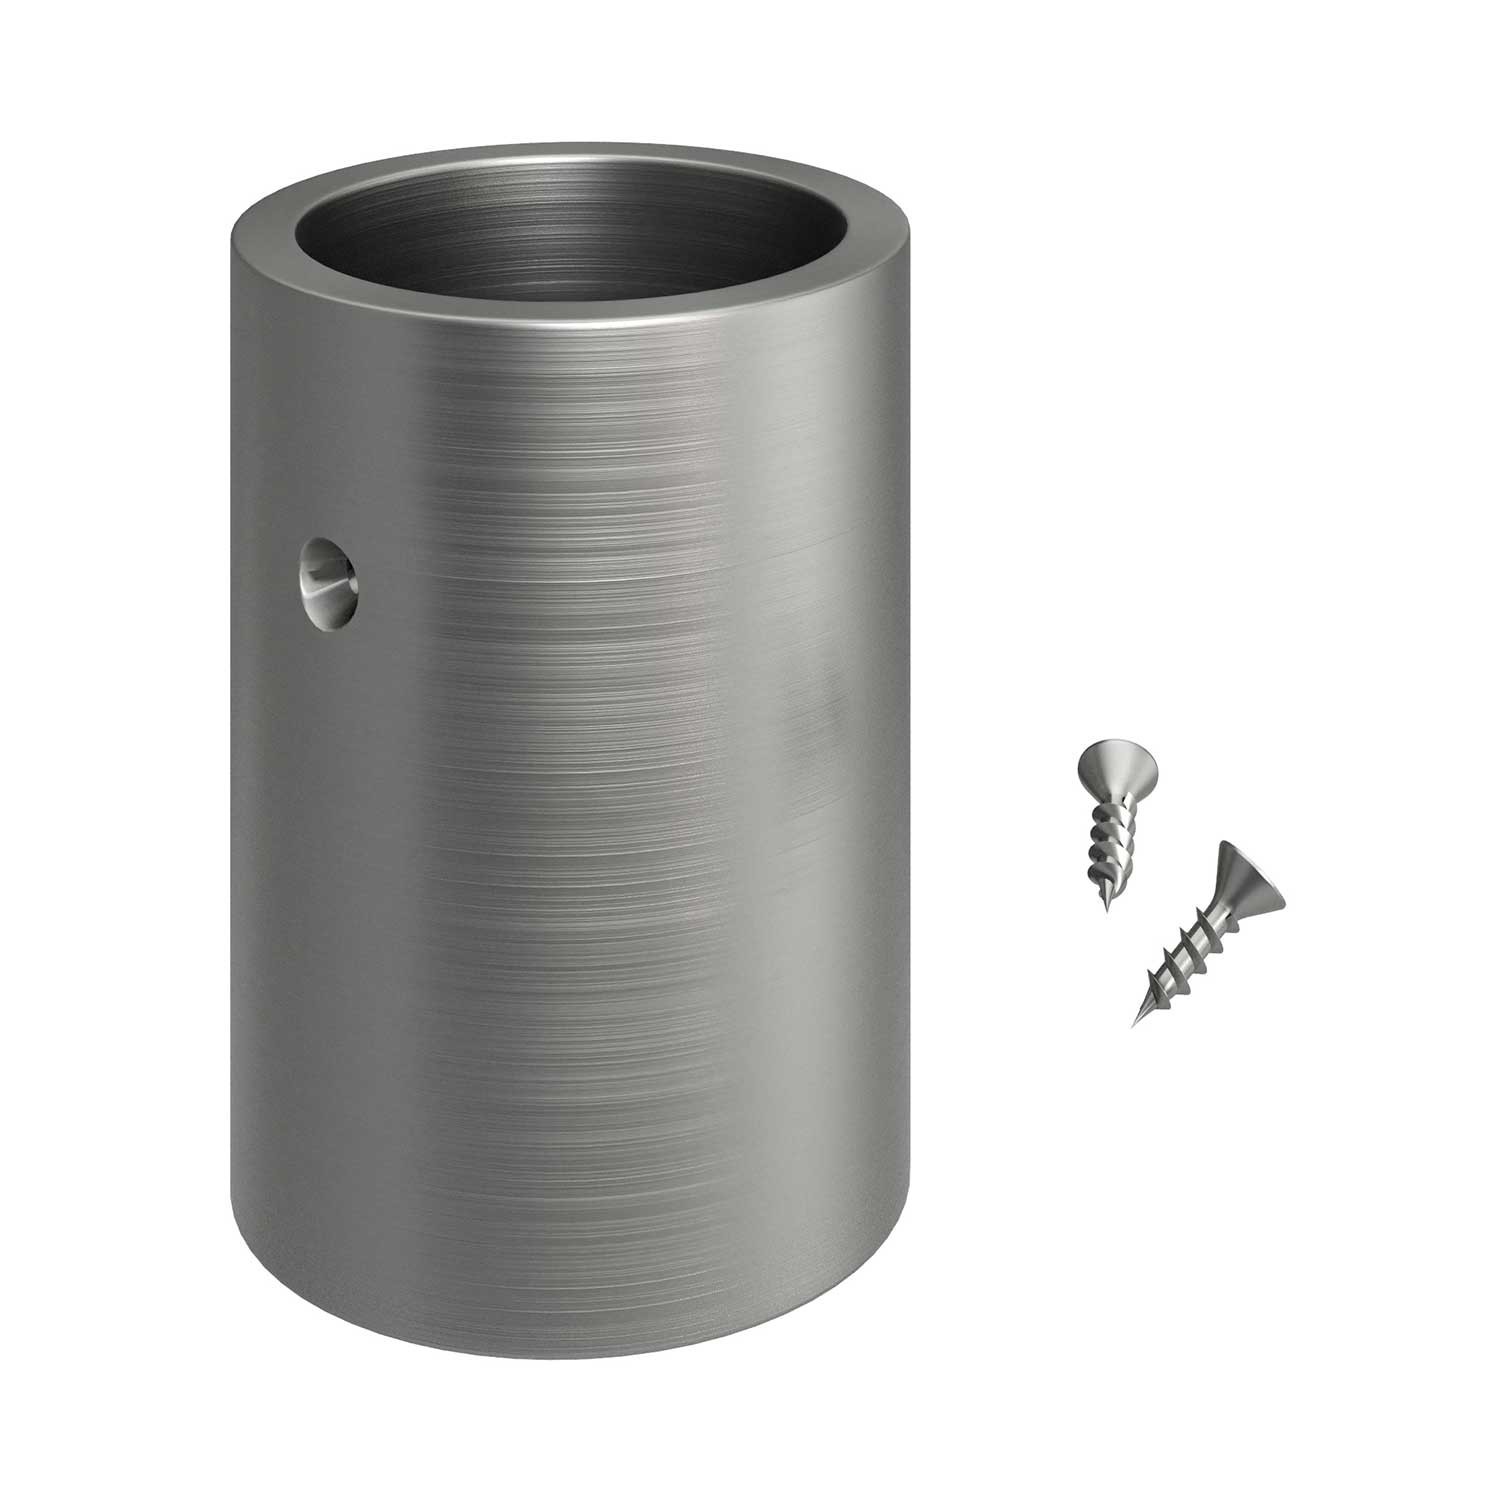 Zinc-pleated metal cable terminal for 20 mm Creative-Tube, accessories included